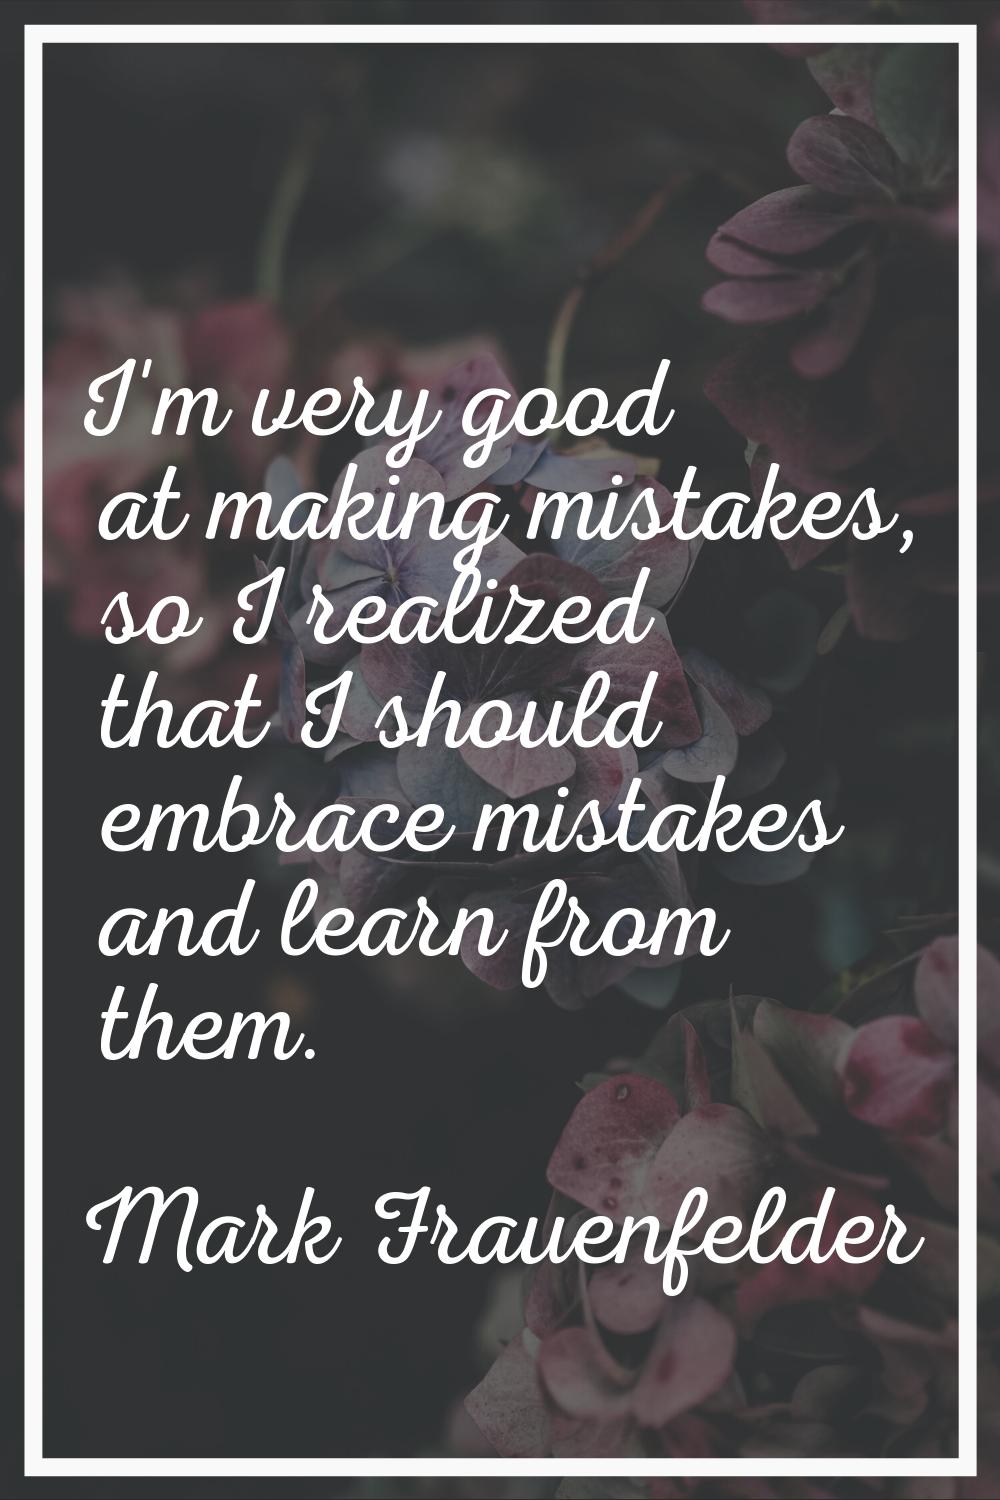 I'm very good at making mistakes, so I realized that I should embrace mistakes and learn from them.